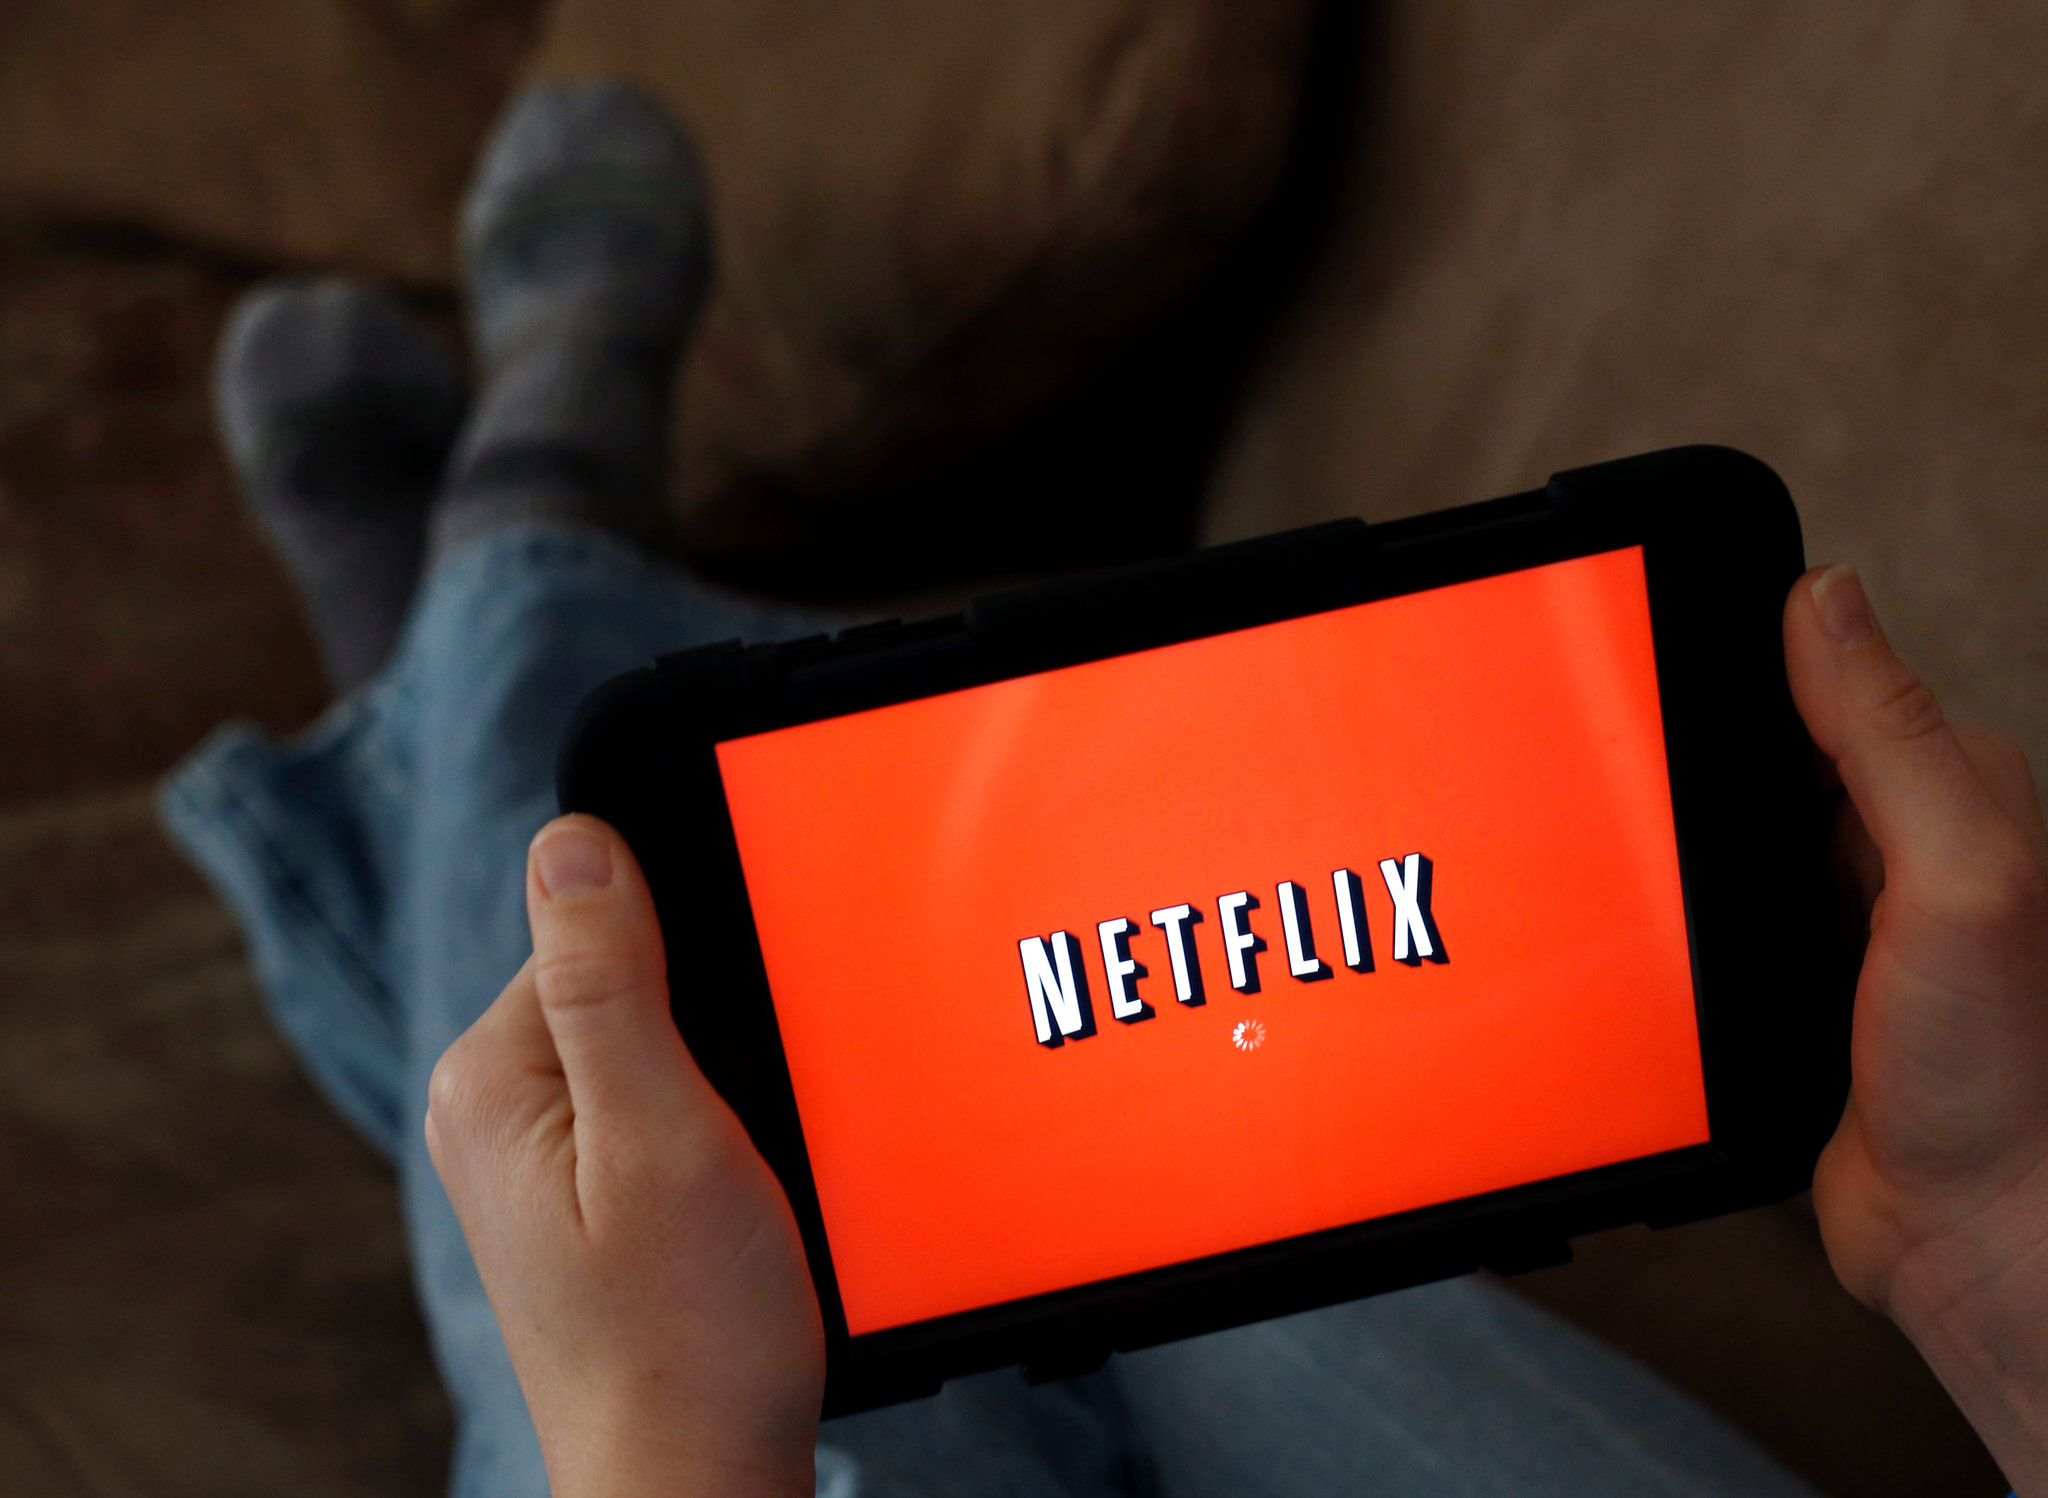 How To Use The Netflix App For Android Tablet To Watch Shows Offline